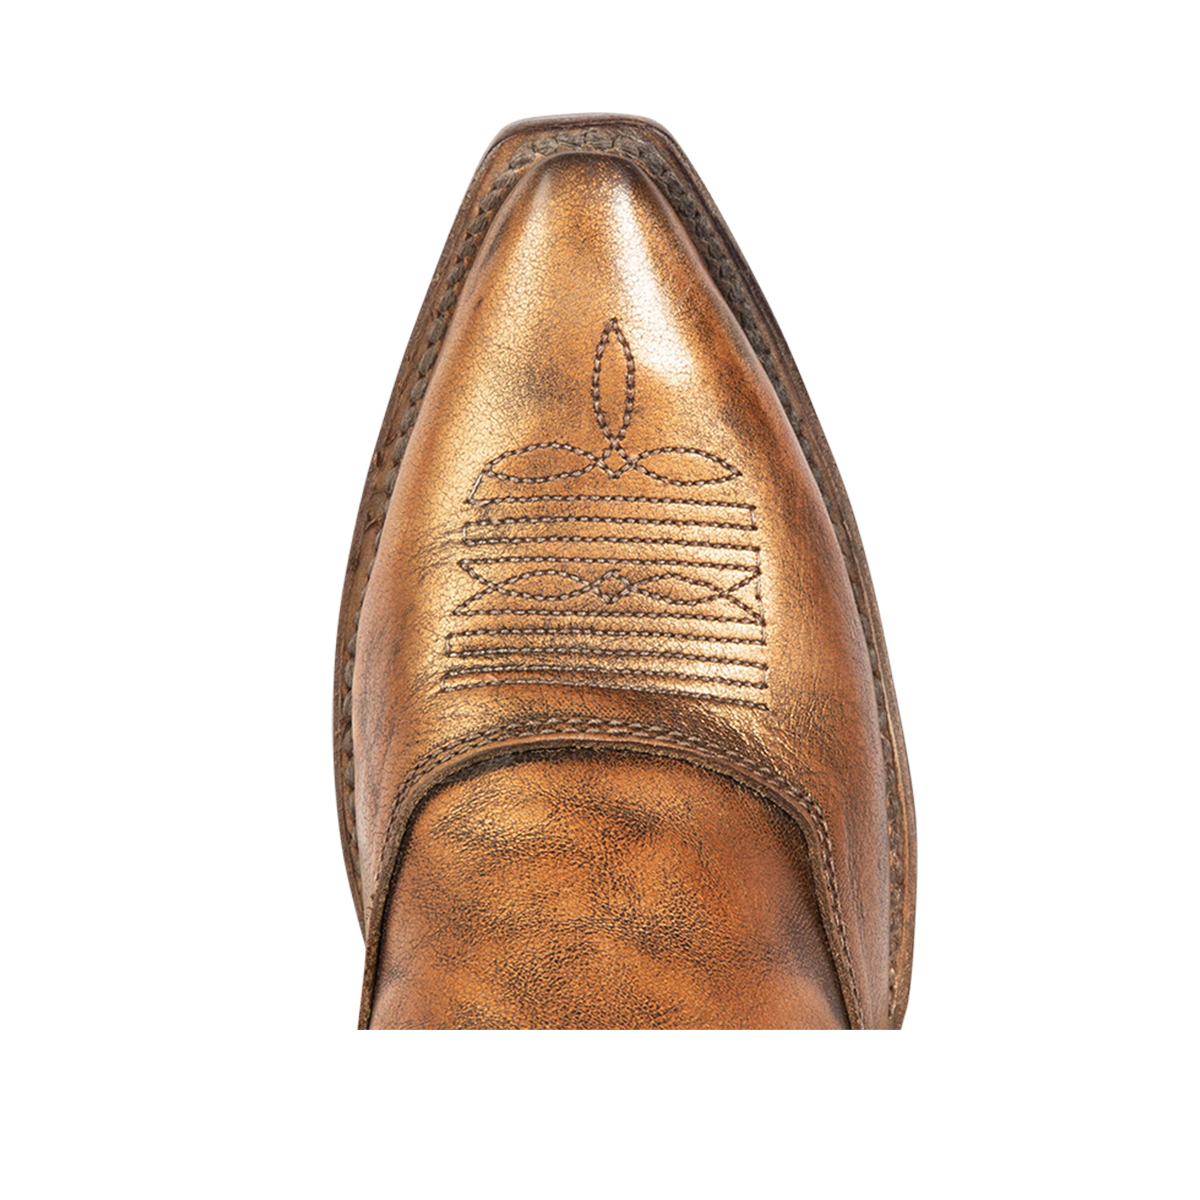 Top view showing snip toe and western stitch detailing on FREEBIRD women's Wyoming bronze western shoe